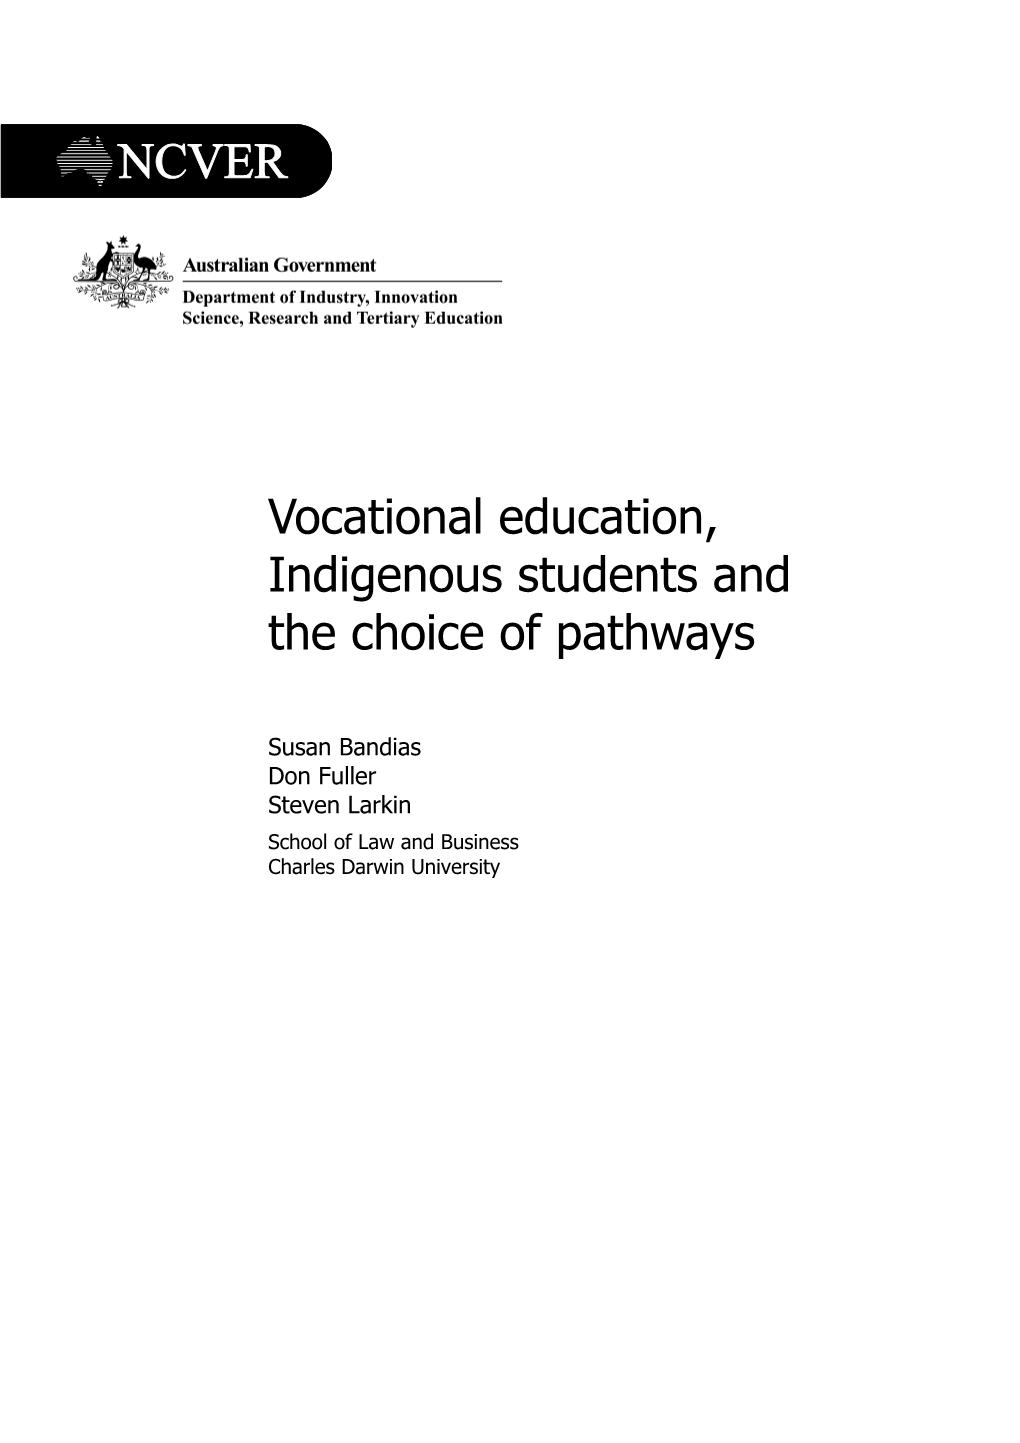 Vocational Education, Indigenous Students and the Choice of Pathways